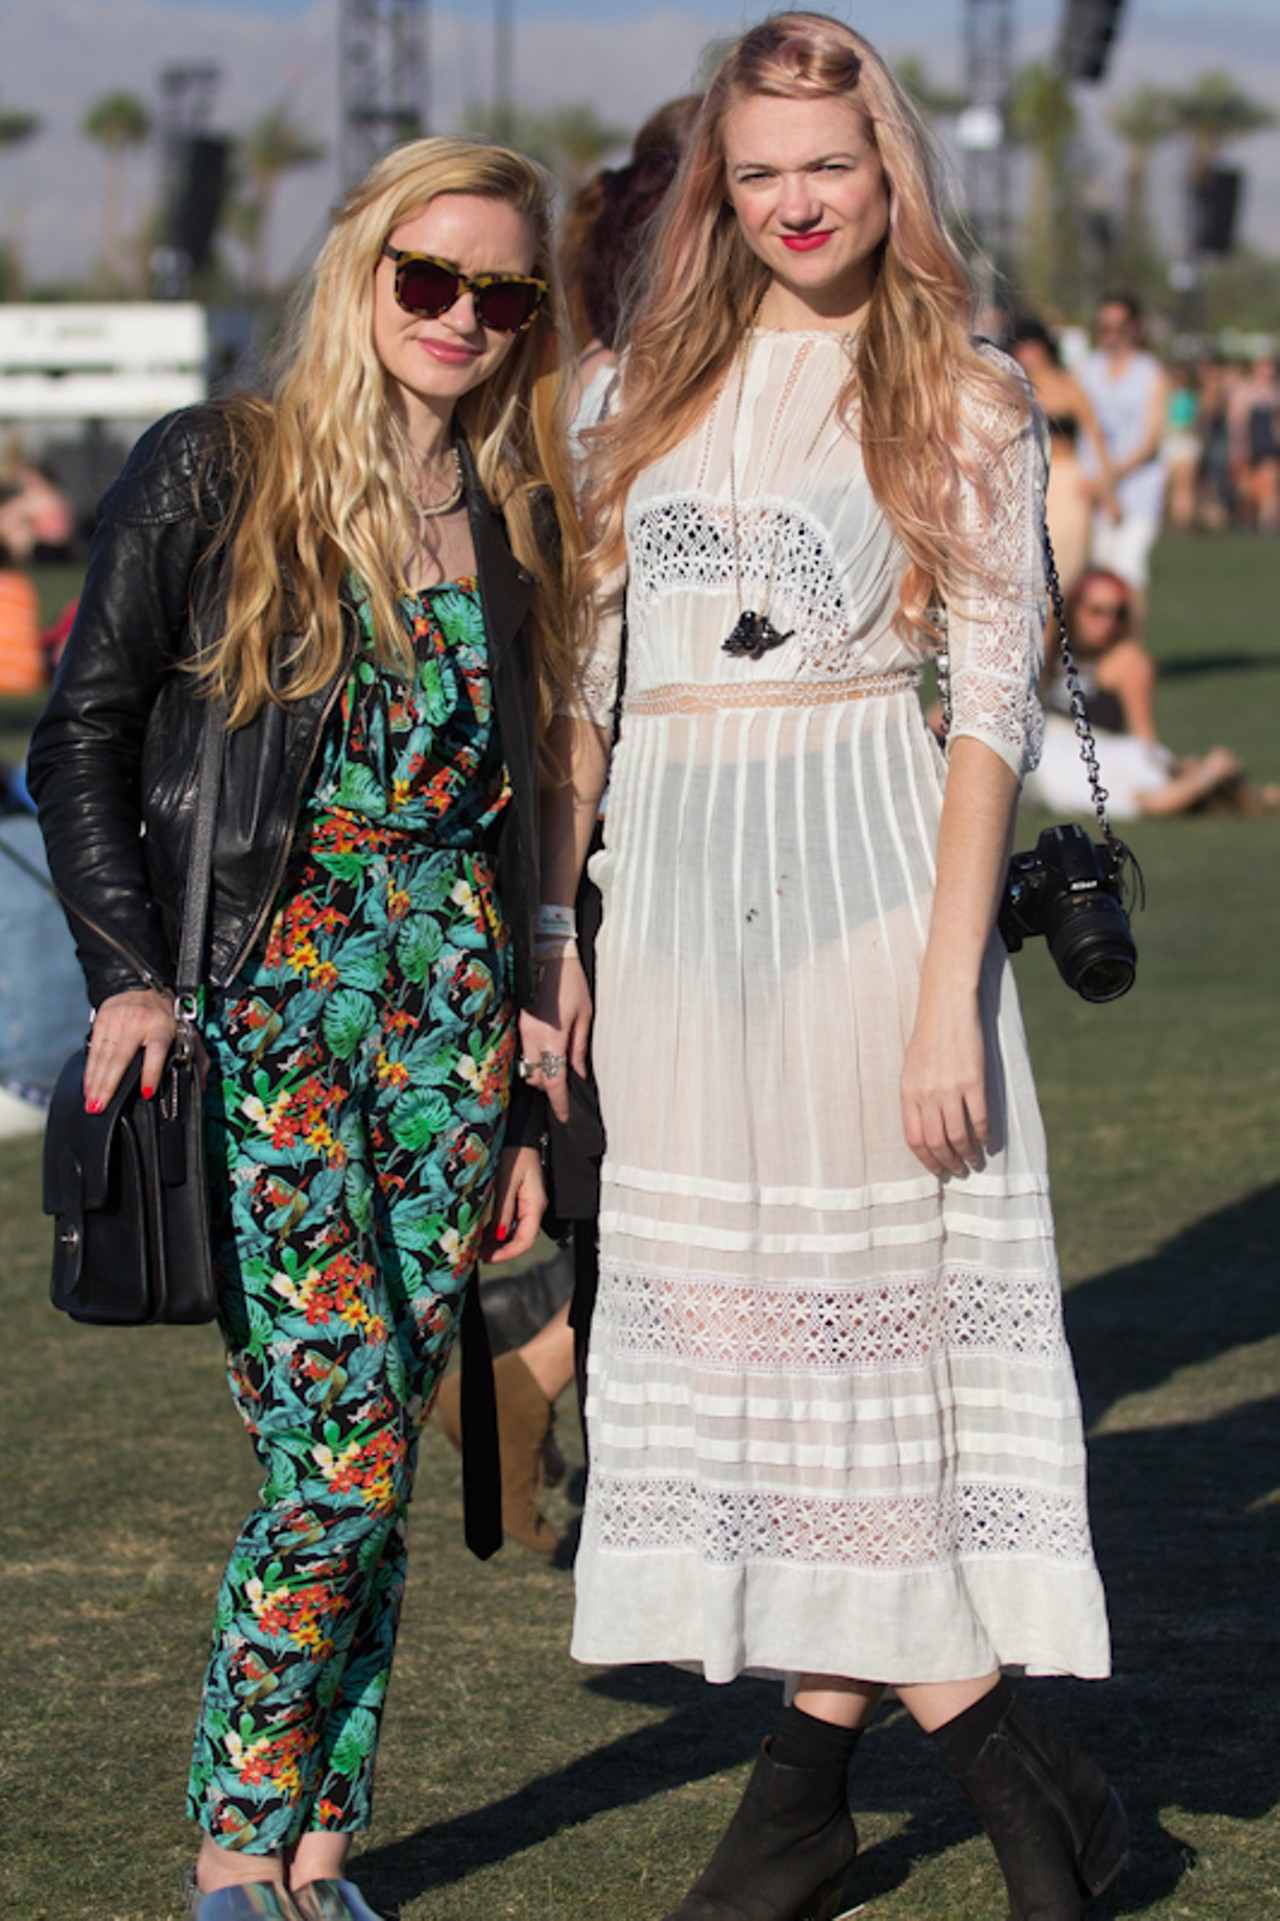 Coachella Weekend One, Day Two: The People